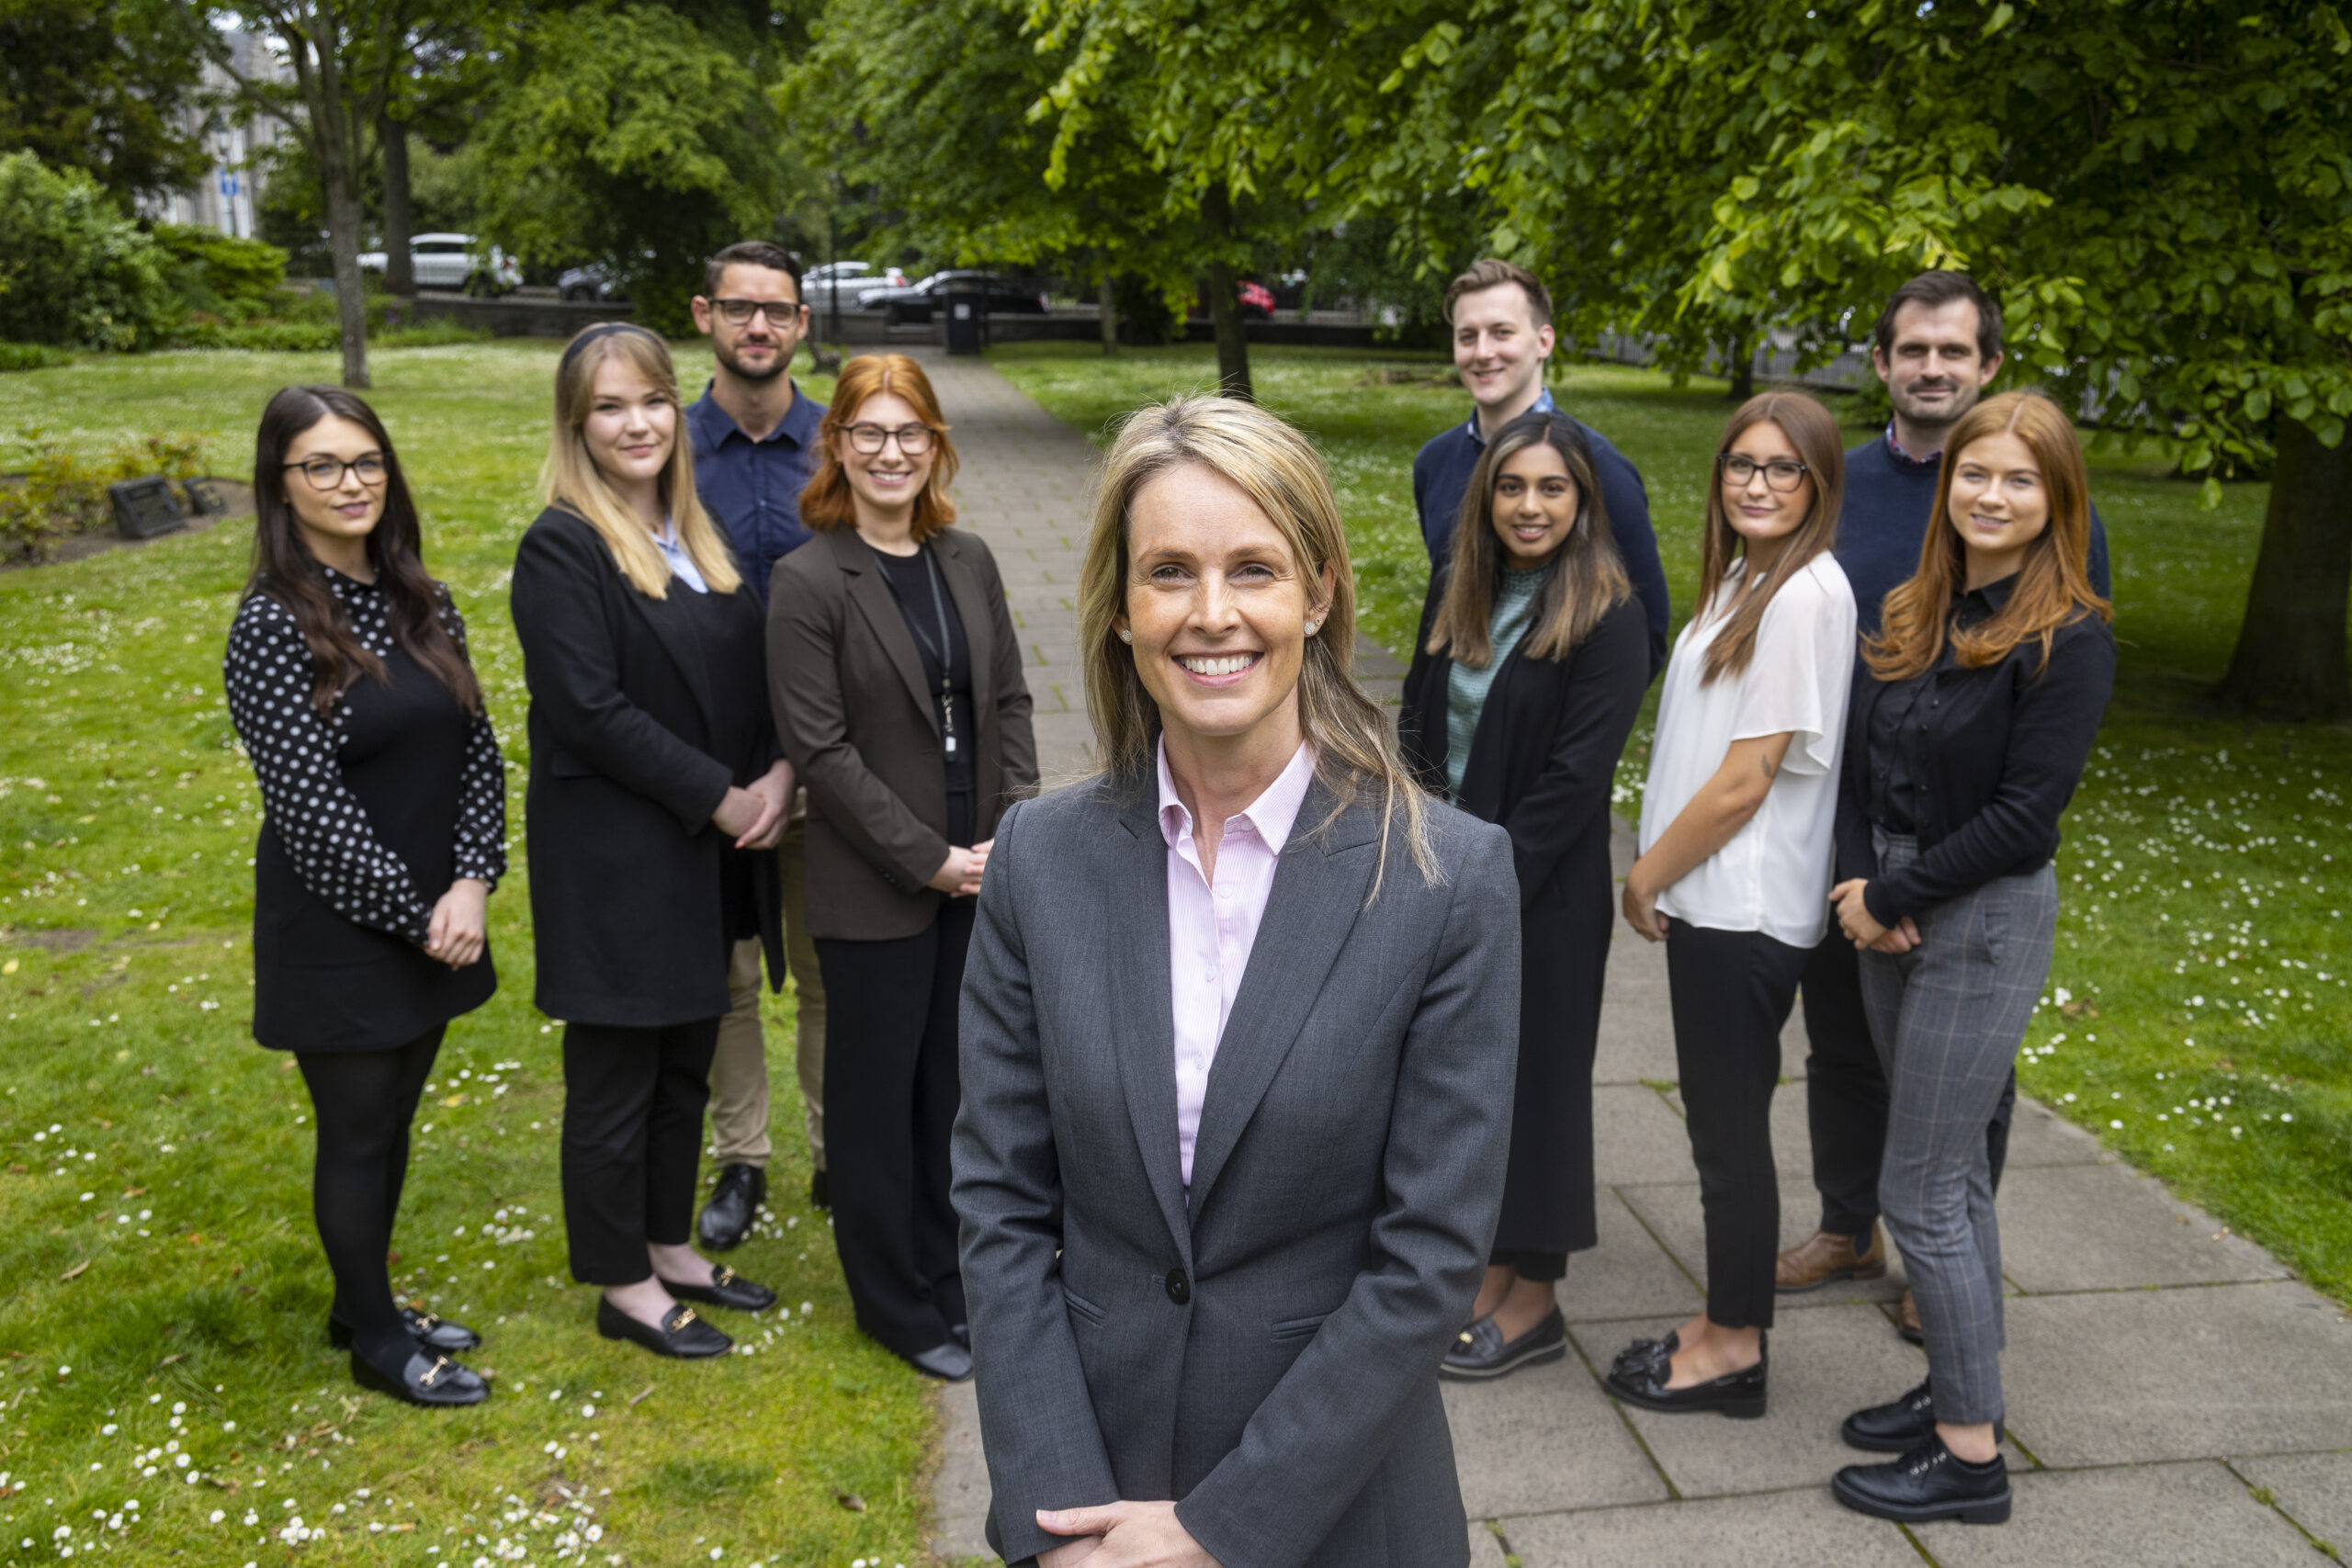 MEMBER NEWS: TMM Recruitment expands team by a third as post-pandemic world creates new opportunities